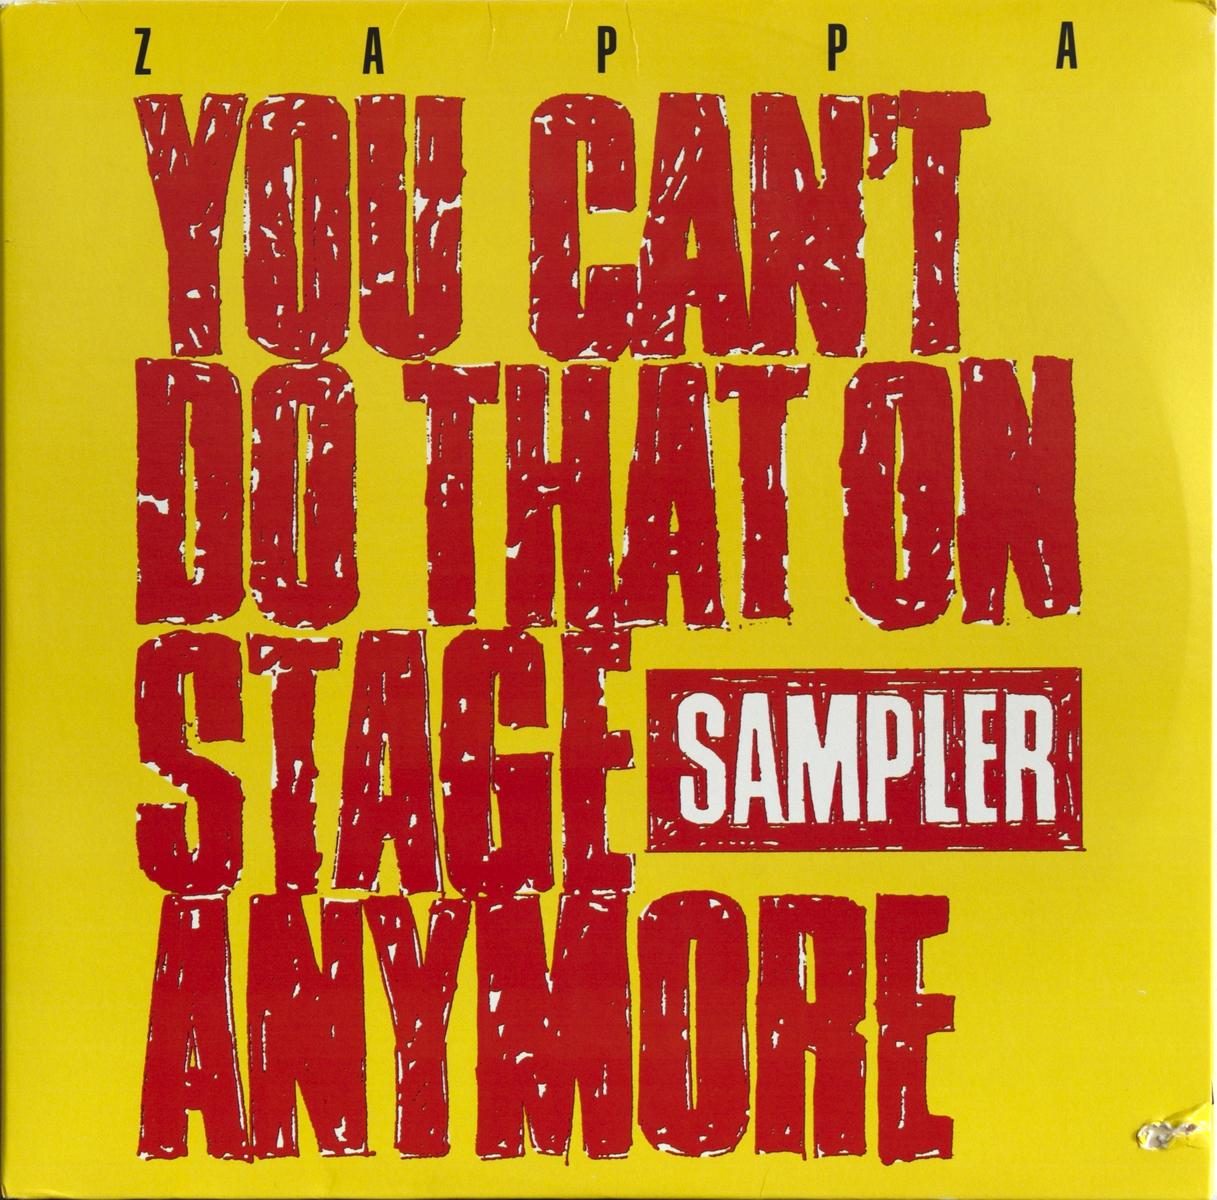 stevevai.it - Frank Zappa - You can't do that on stage anymore - Sampler